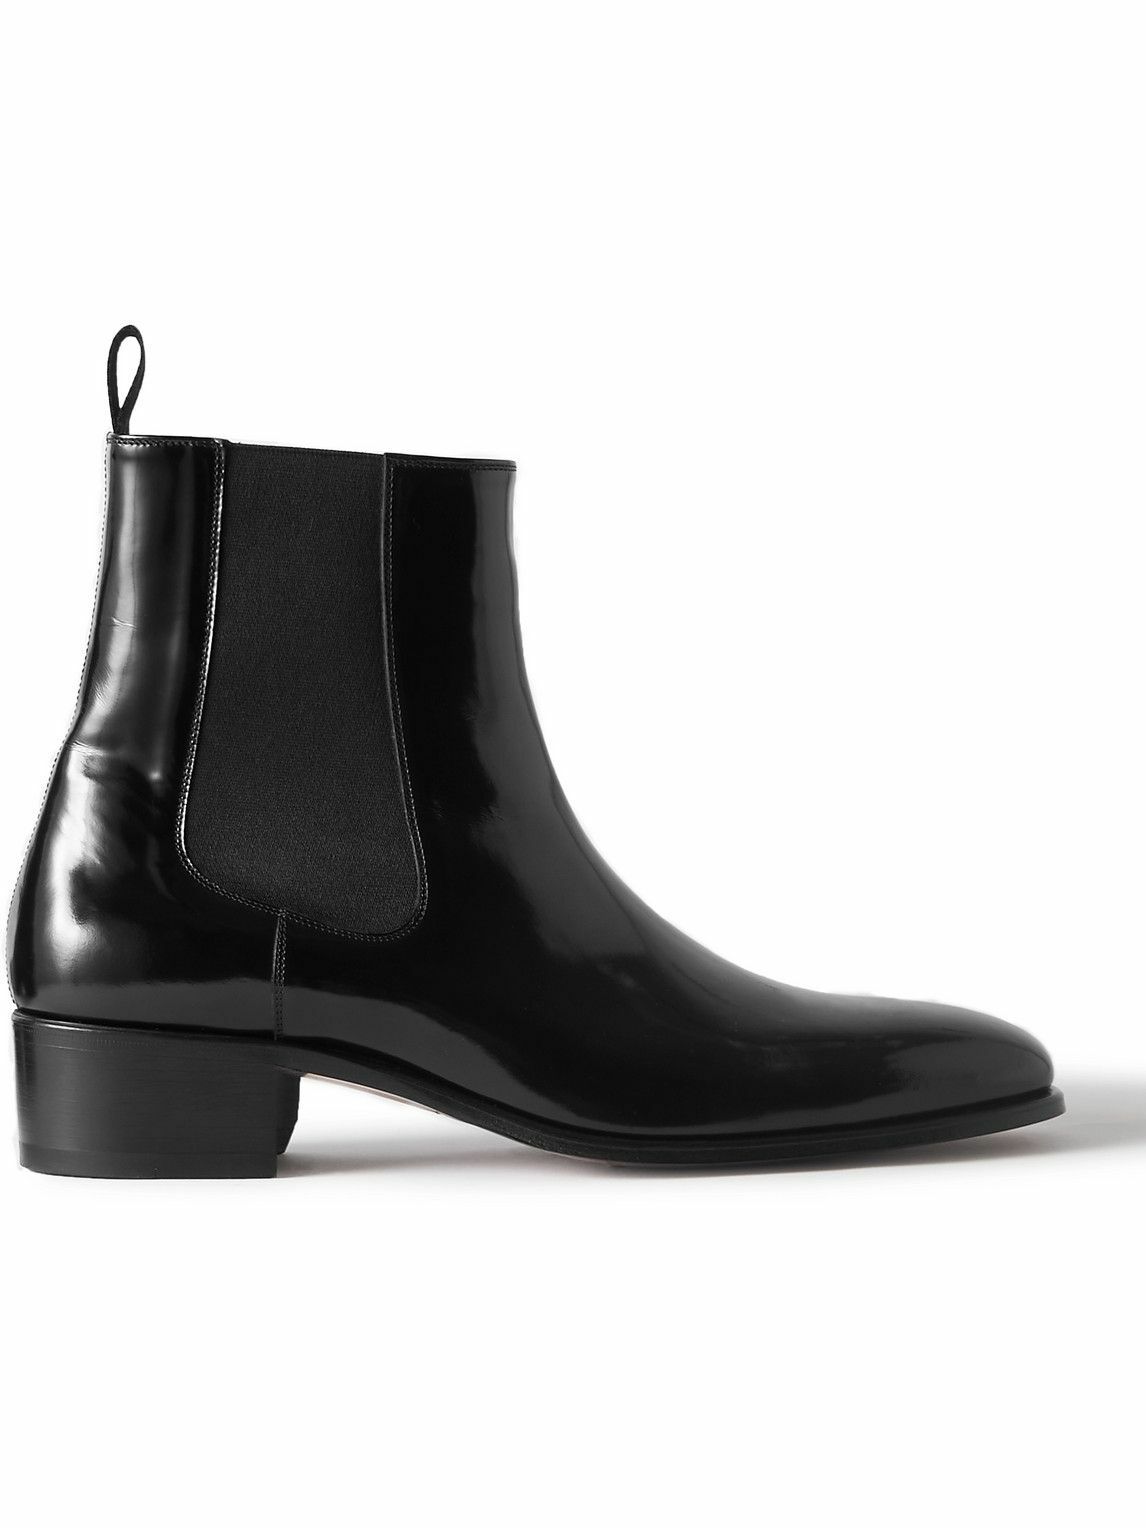 Photo: TOM FORD - Alec Patent-Leather Chelsea Boots - Black